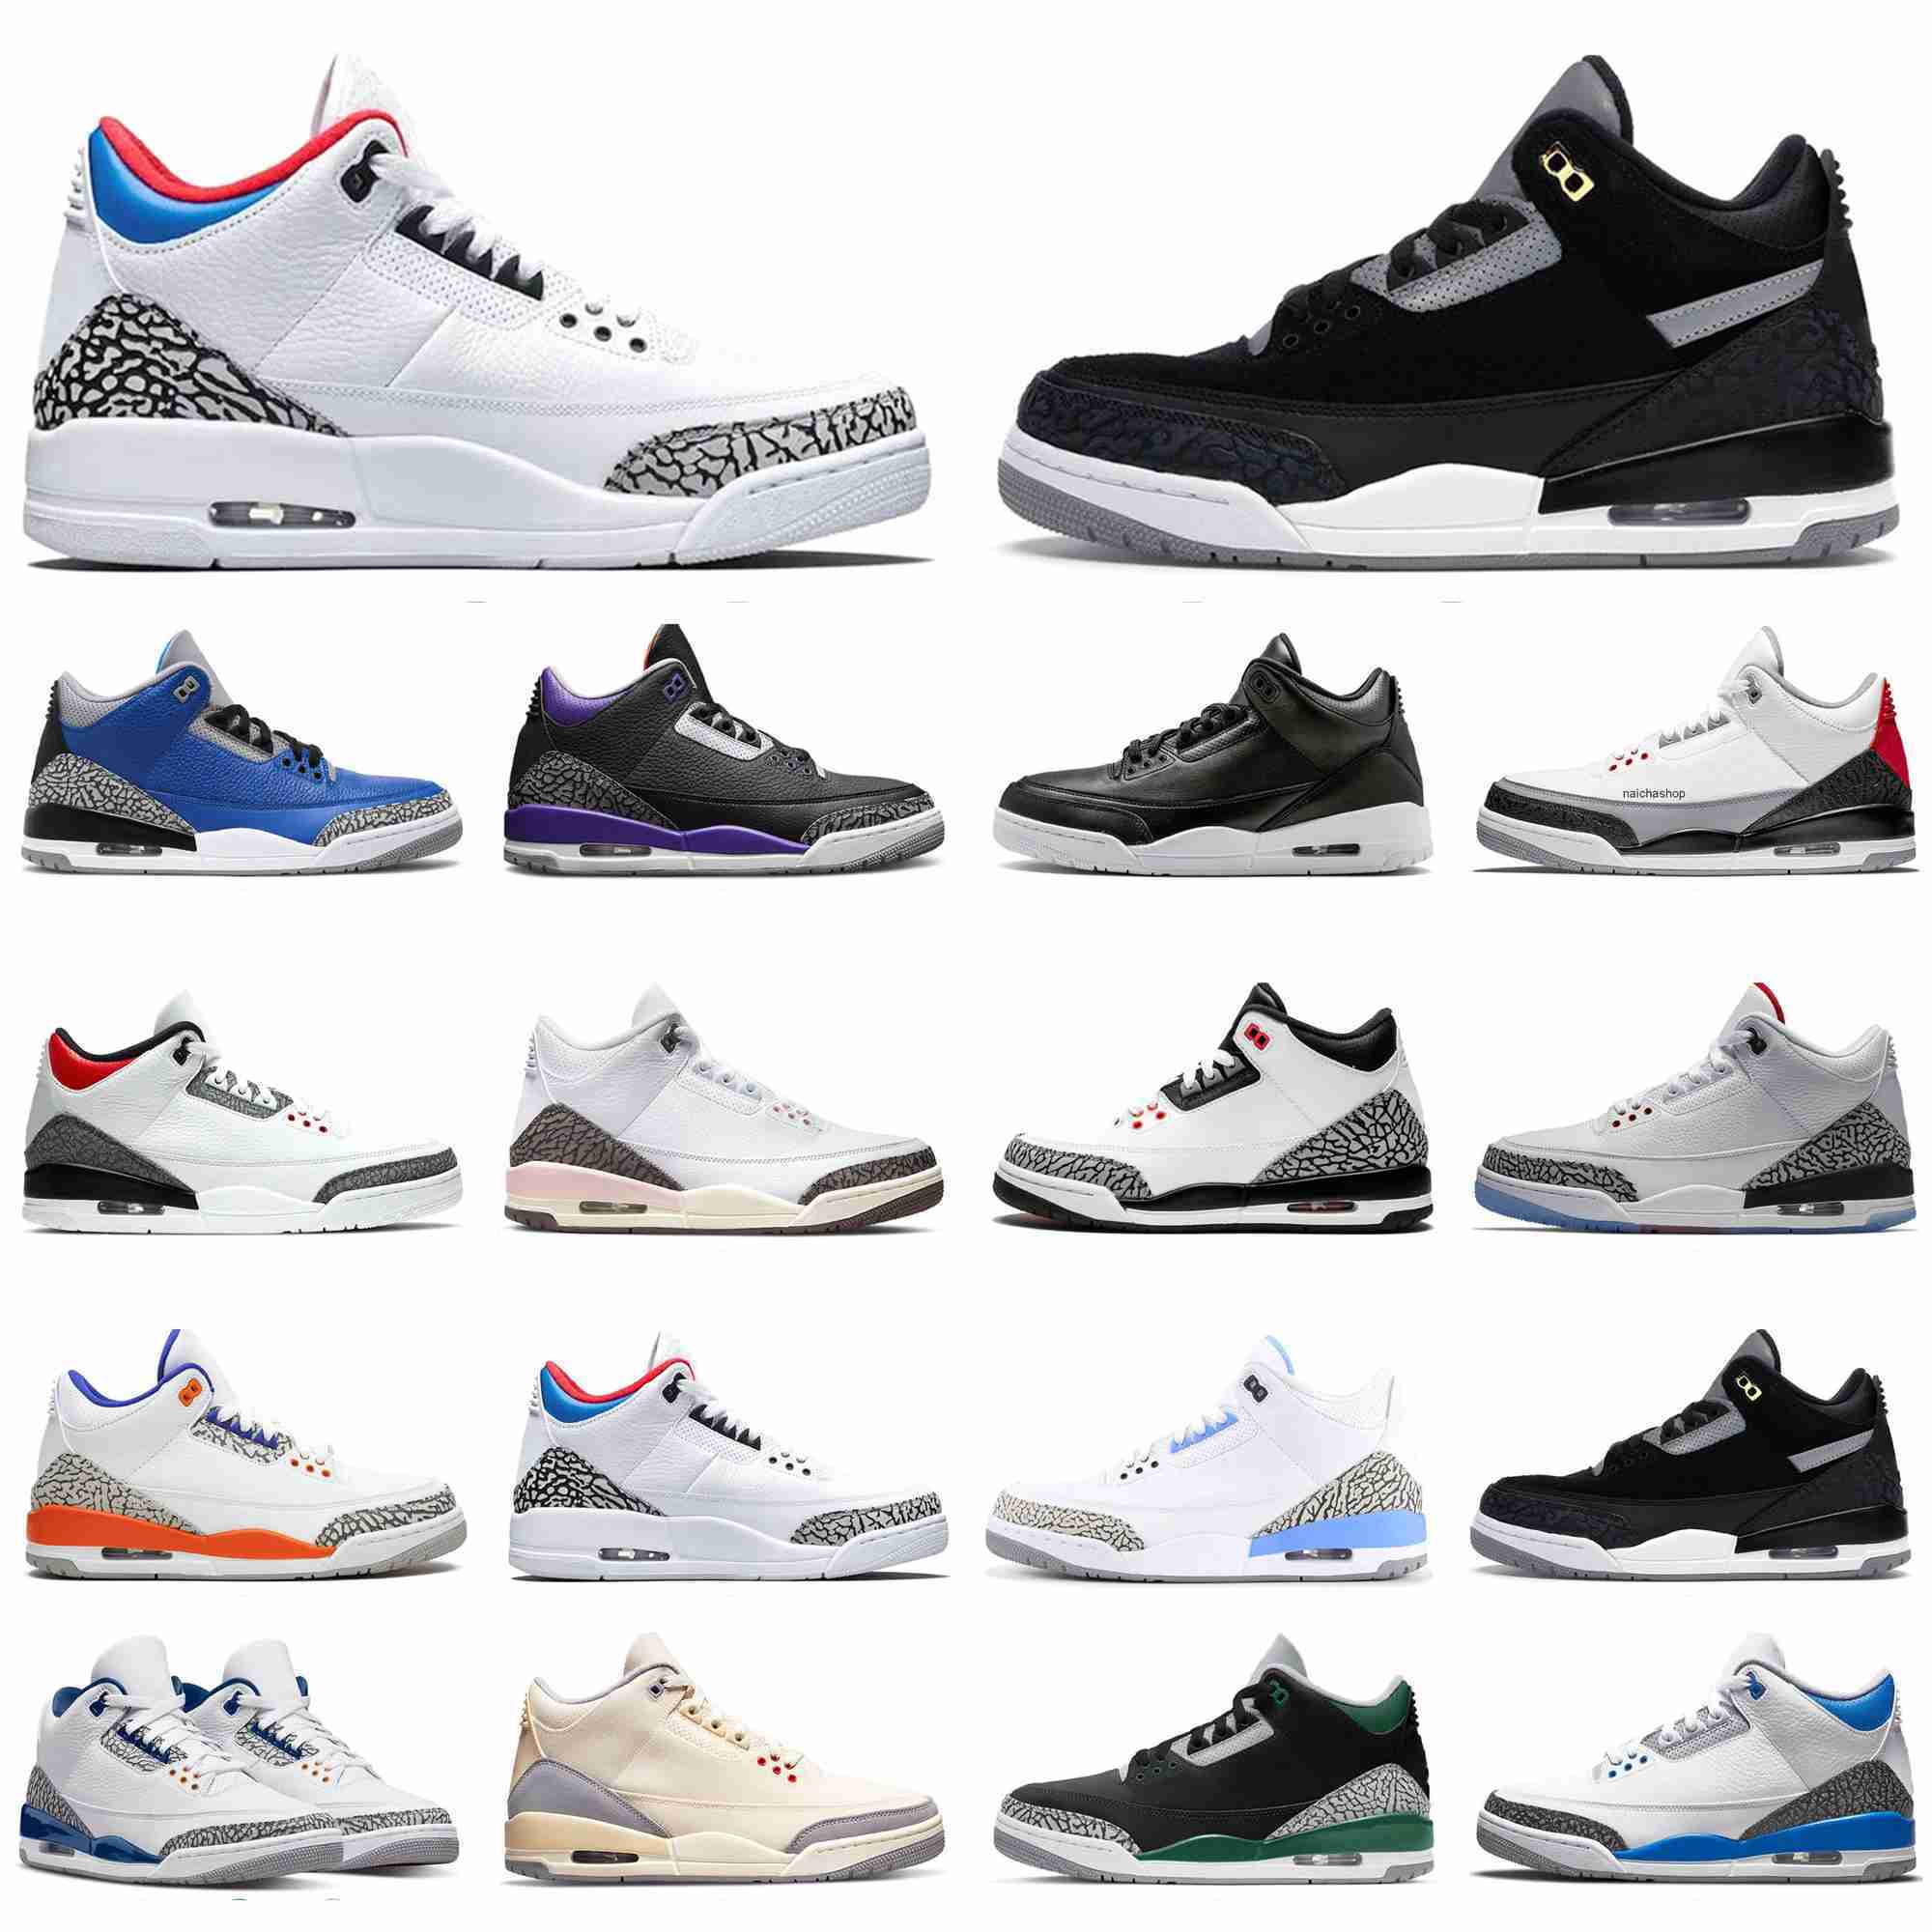 

3 3s Shoes Jumpman Basketball Shoes Mens men Cool Grey Georgetown UNC Pine Green Racer Blue trainers outdoor sports sneakers women Hall of Fame laser Orange JORDON, #21 a ma maniere 40-47